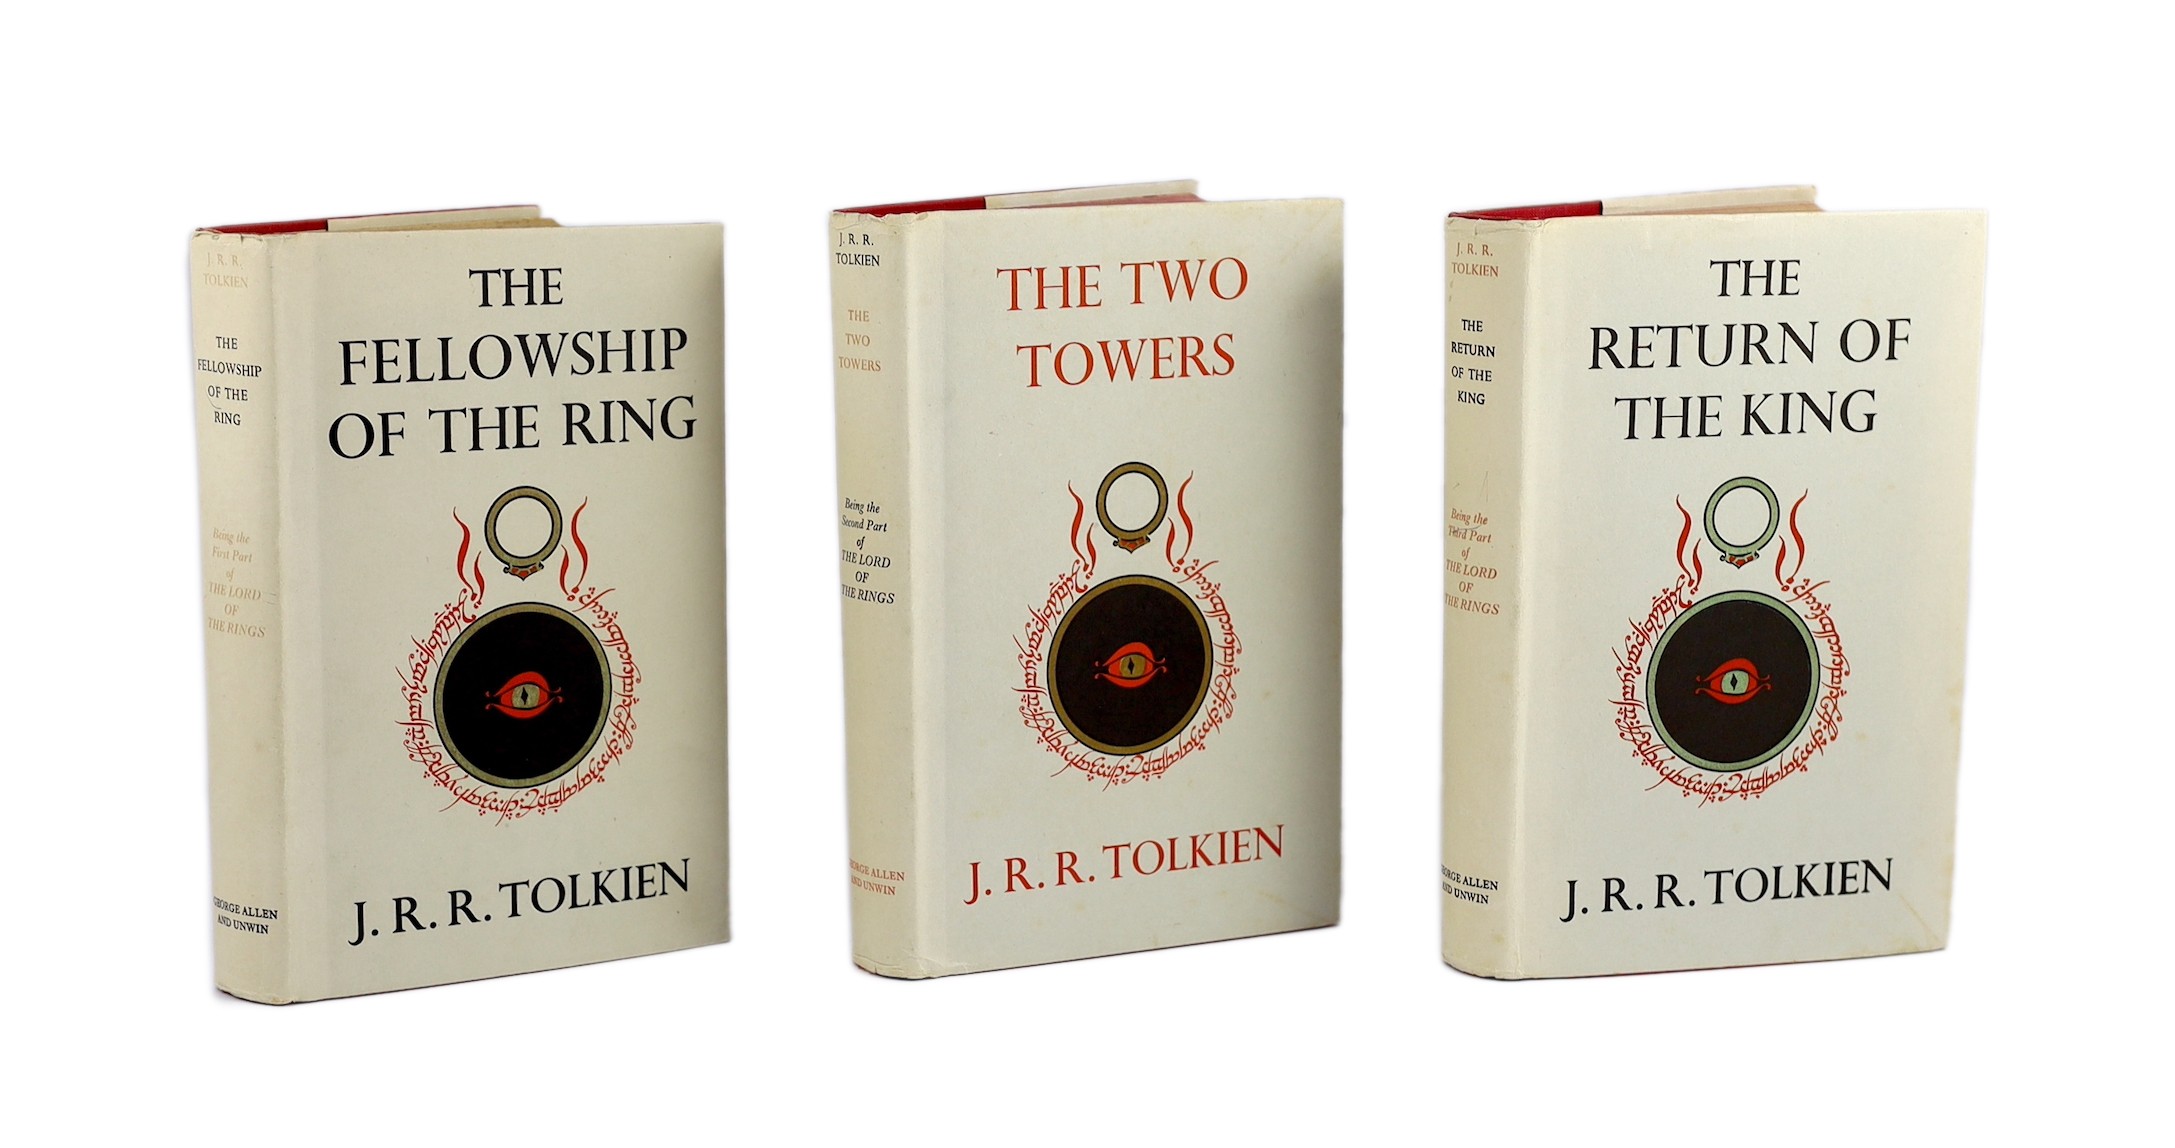 ° ° Tolkien, John Ronald Reuel - The Lord of the Rings, 1st editions, 1st impressions of Towers